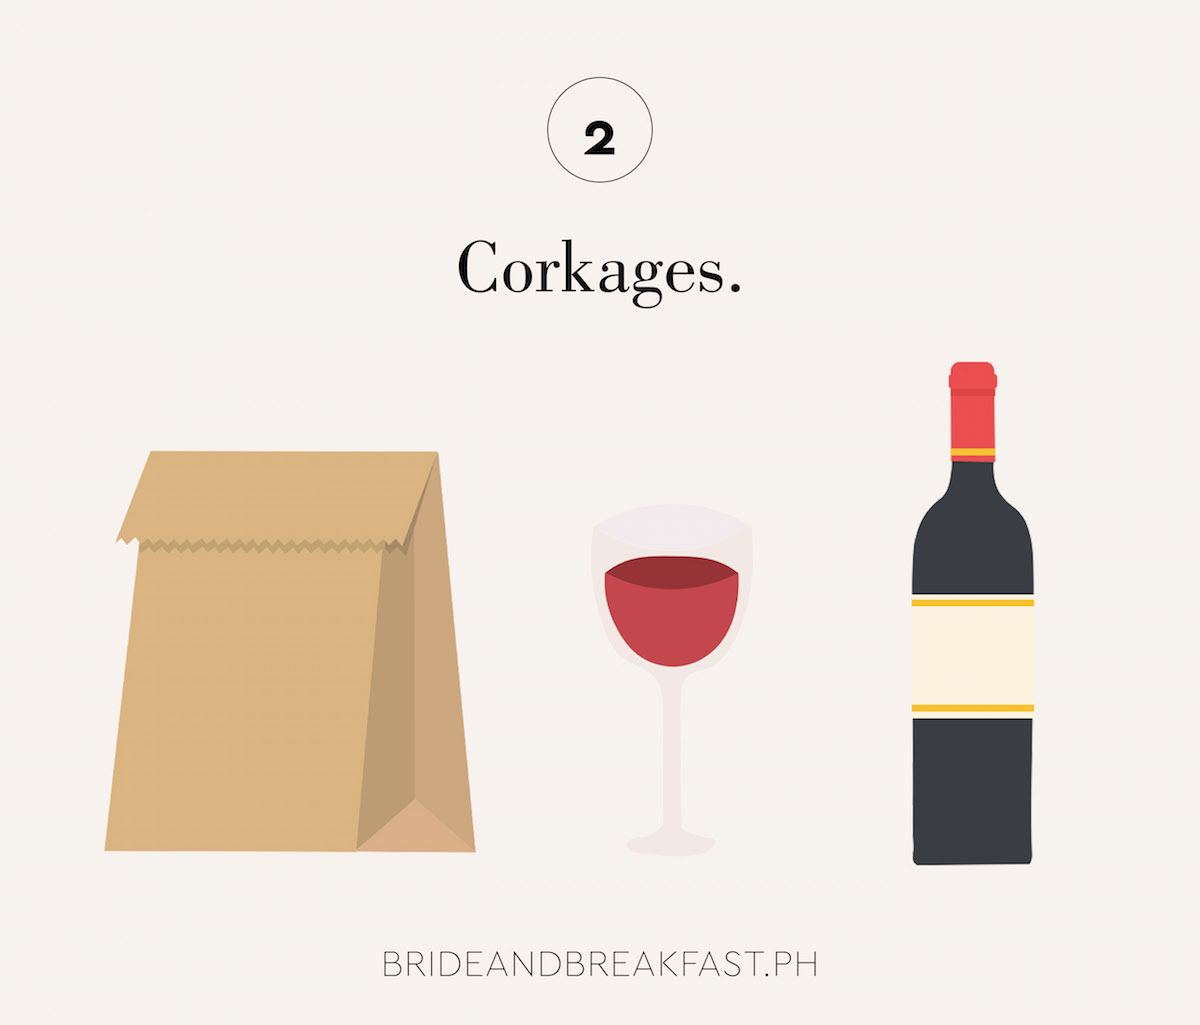 2 Corkages.